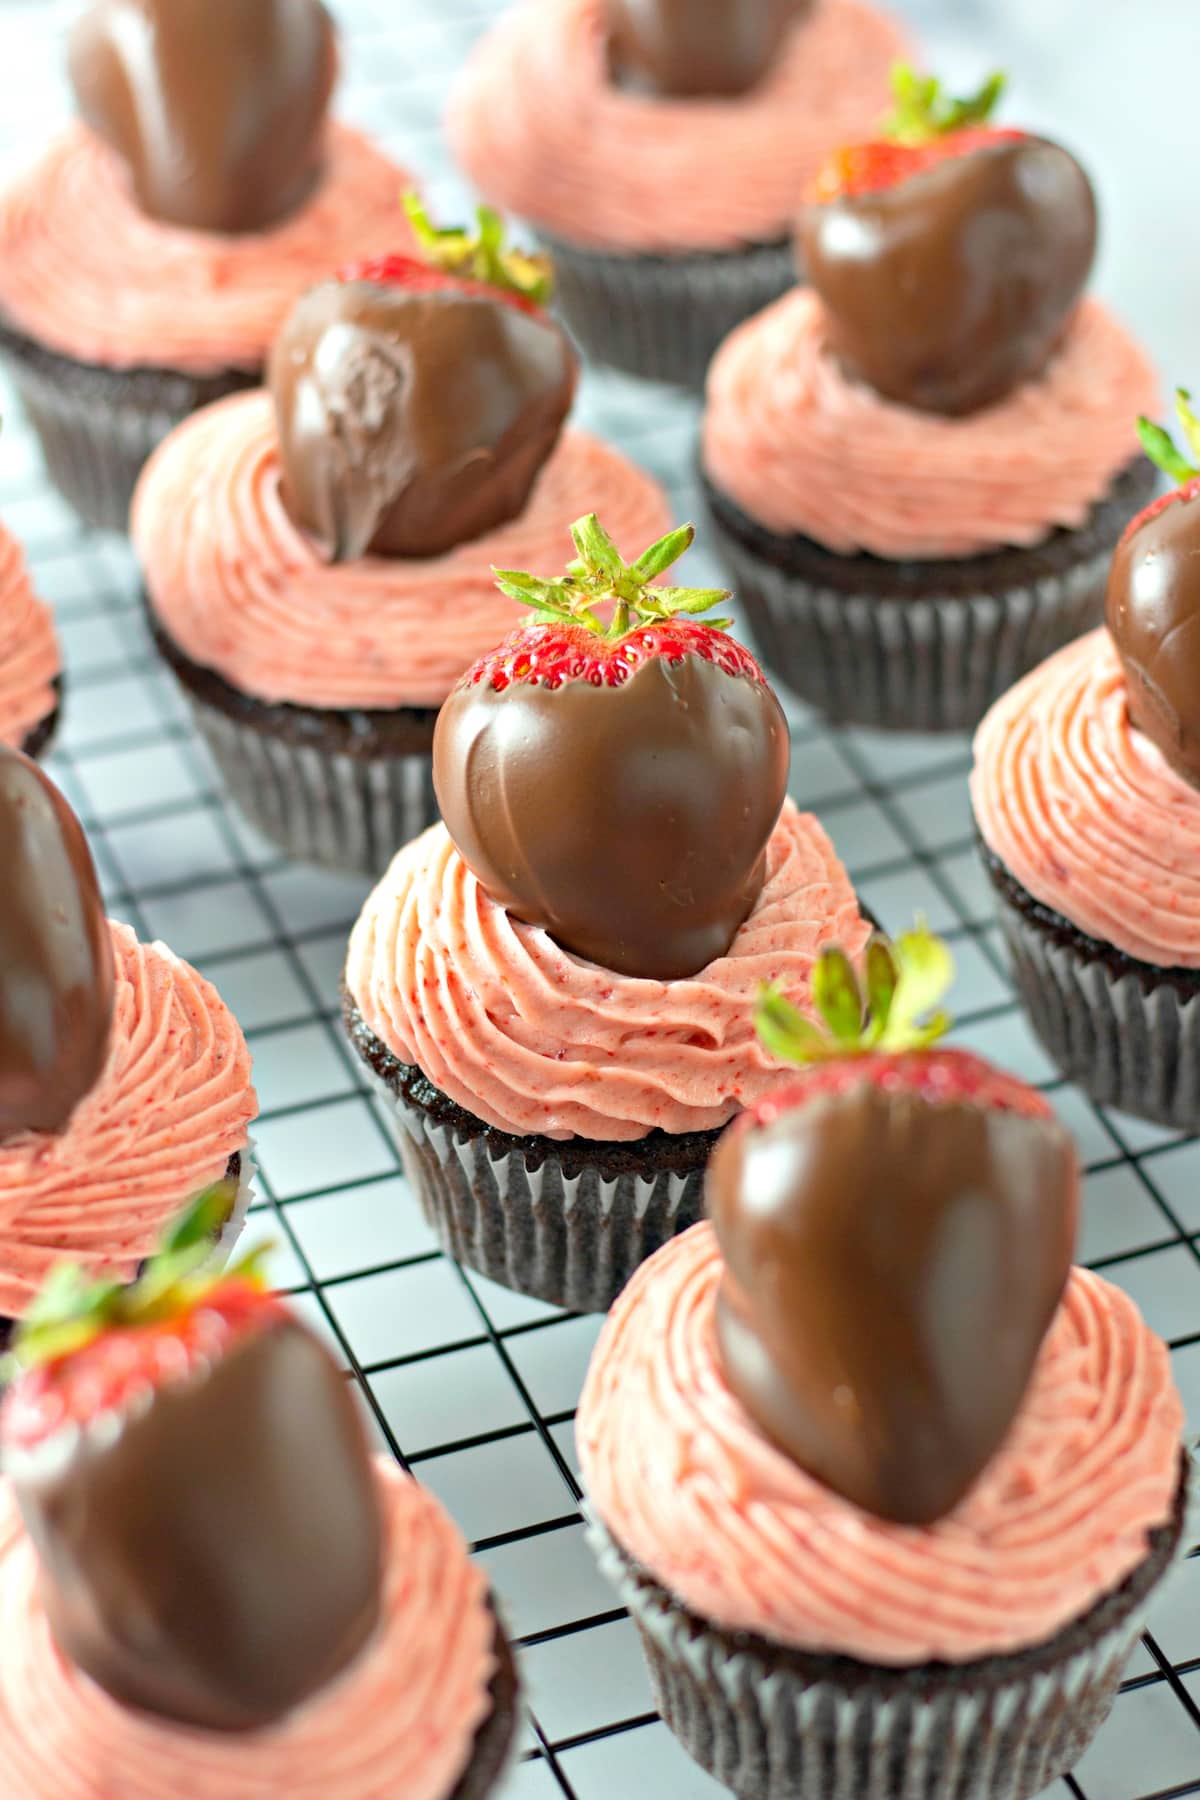 Chocolate covered strawberry cupcakes on a cooling rack